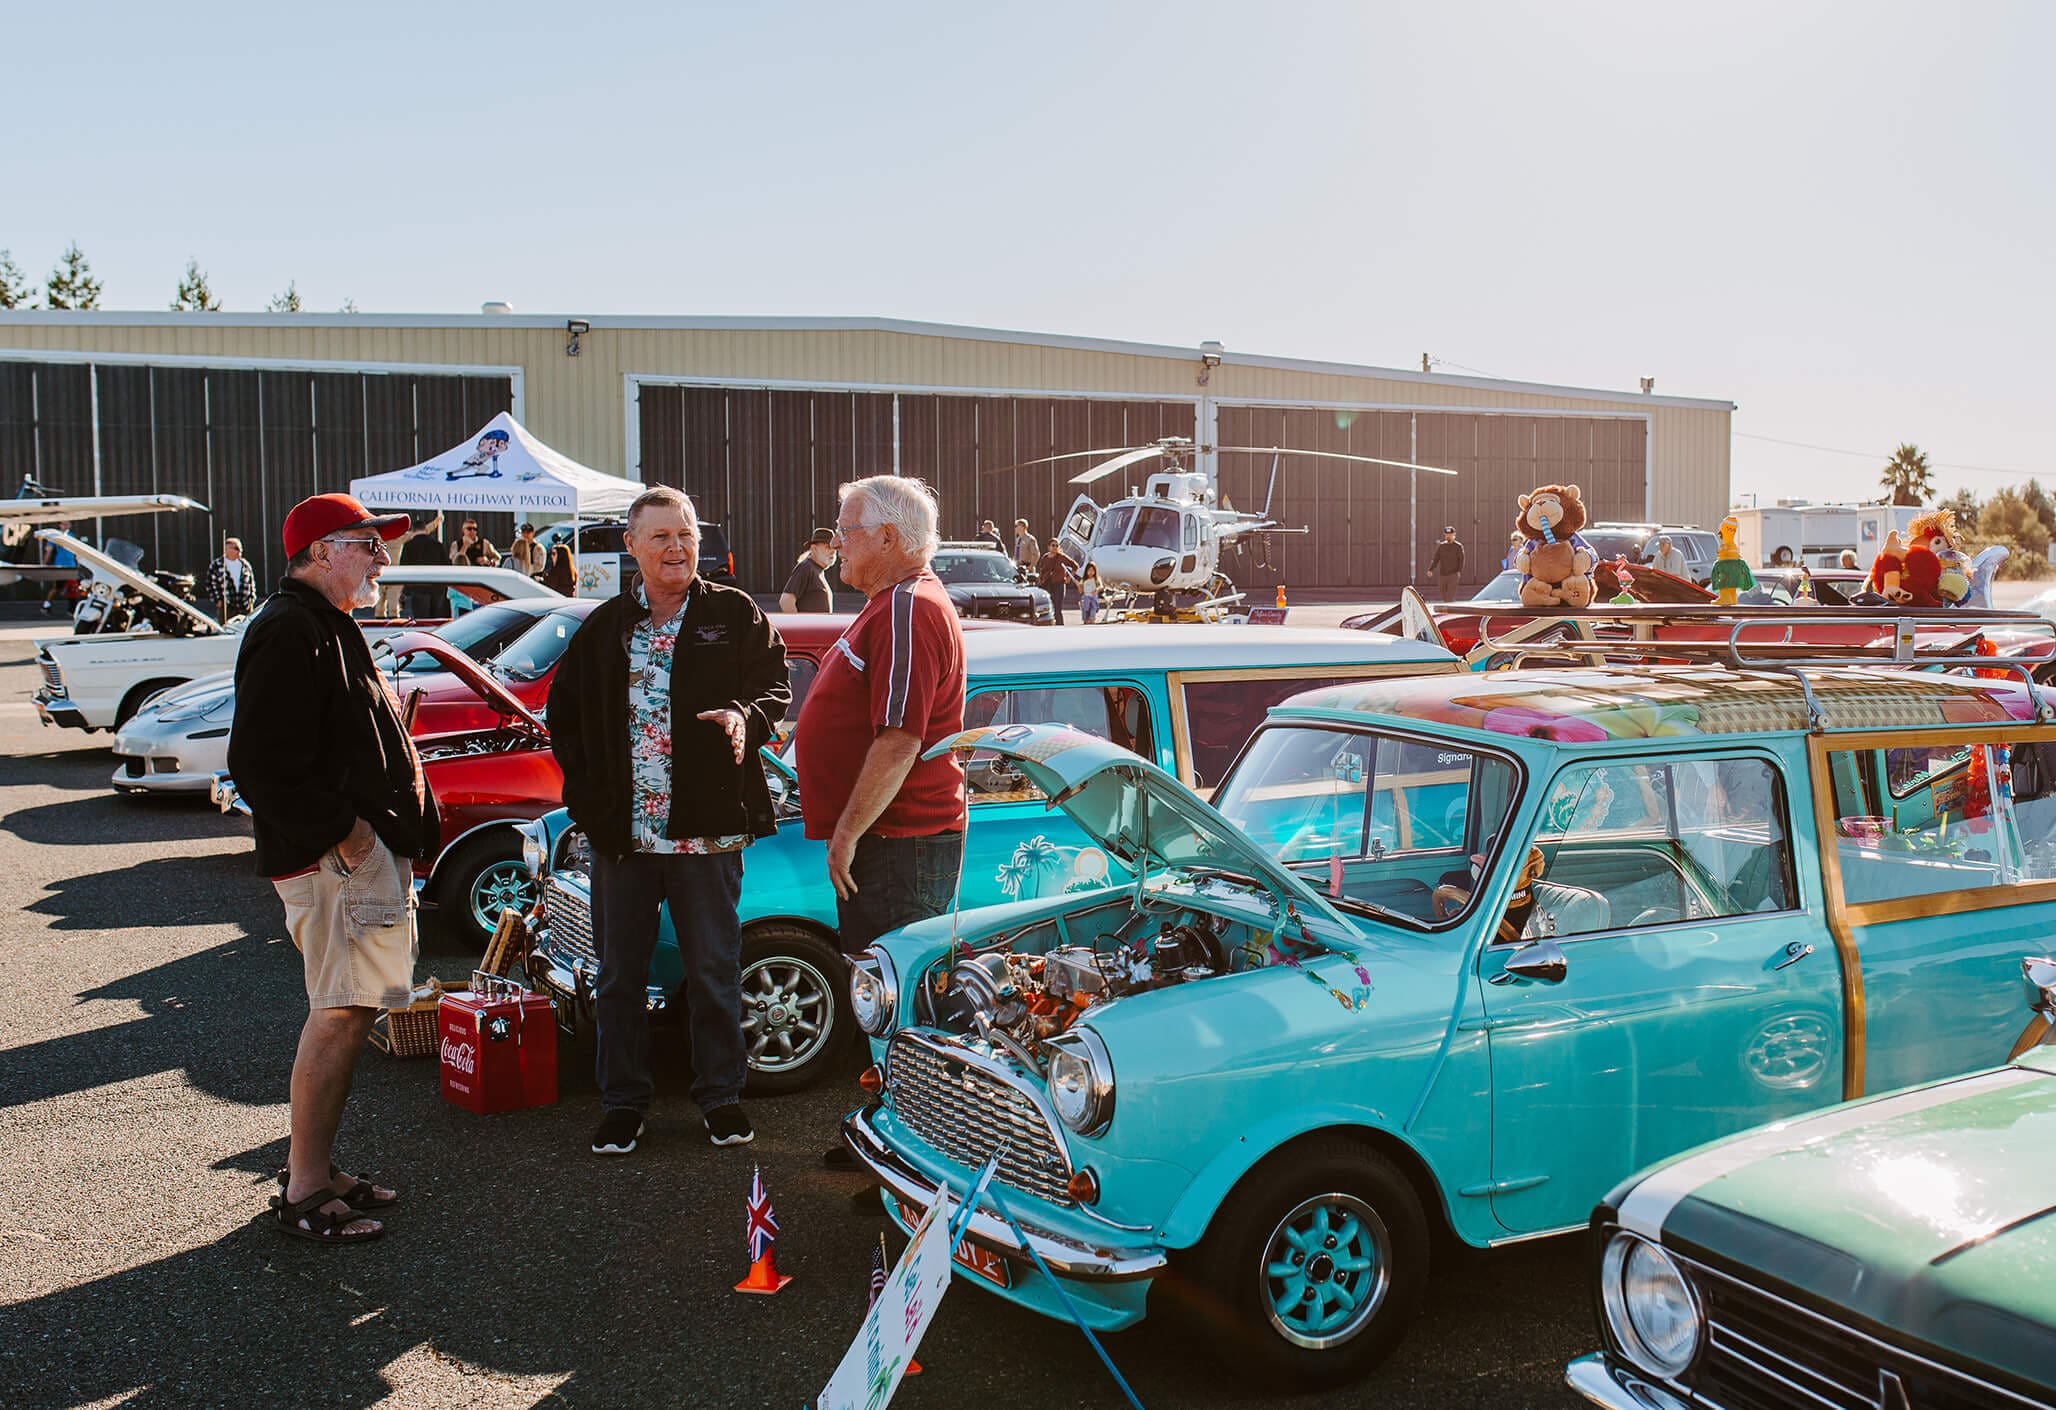 A group of older gentlemen stand and chat aside their vintage automobiles at a car show event in Redding, CA